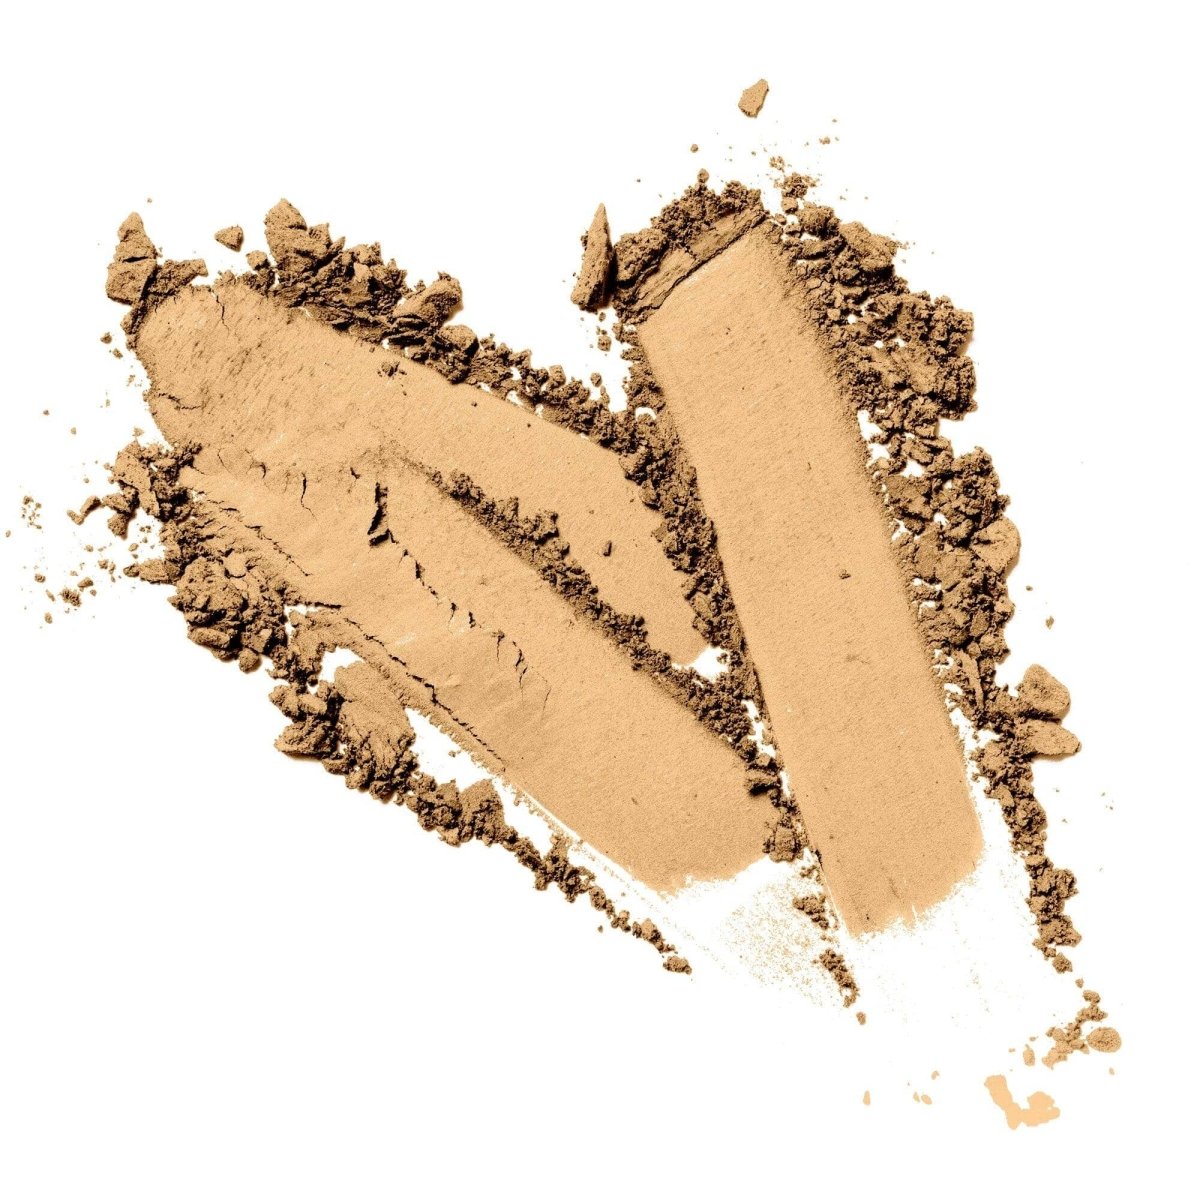 Heart-shaped vegan powder  of  skin matte color displayed on a white surface